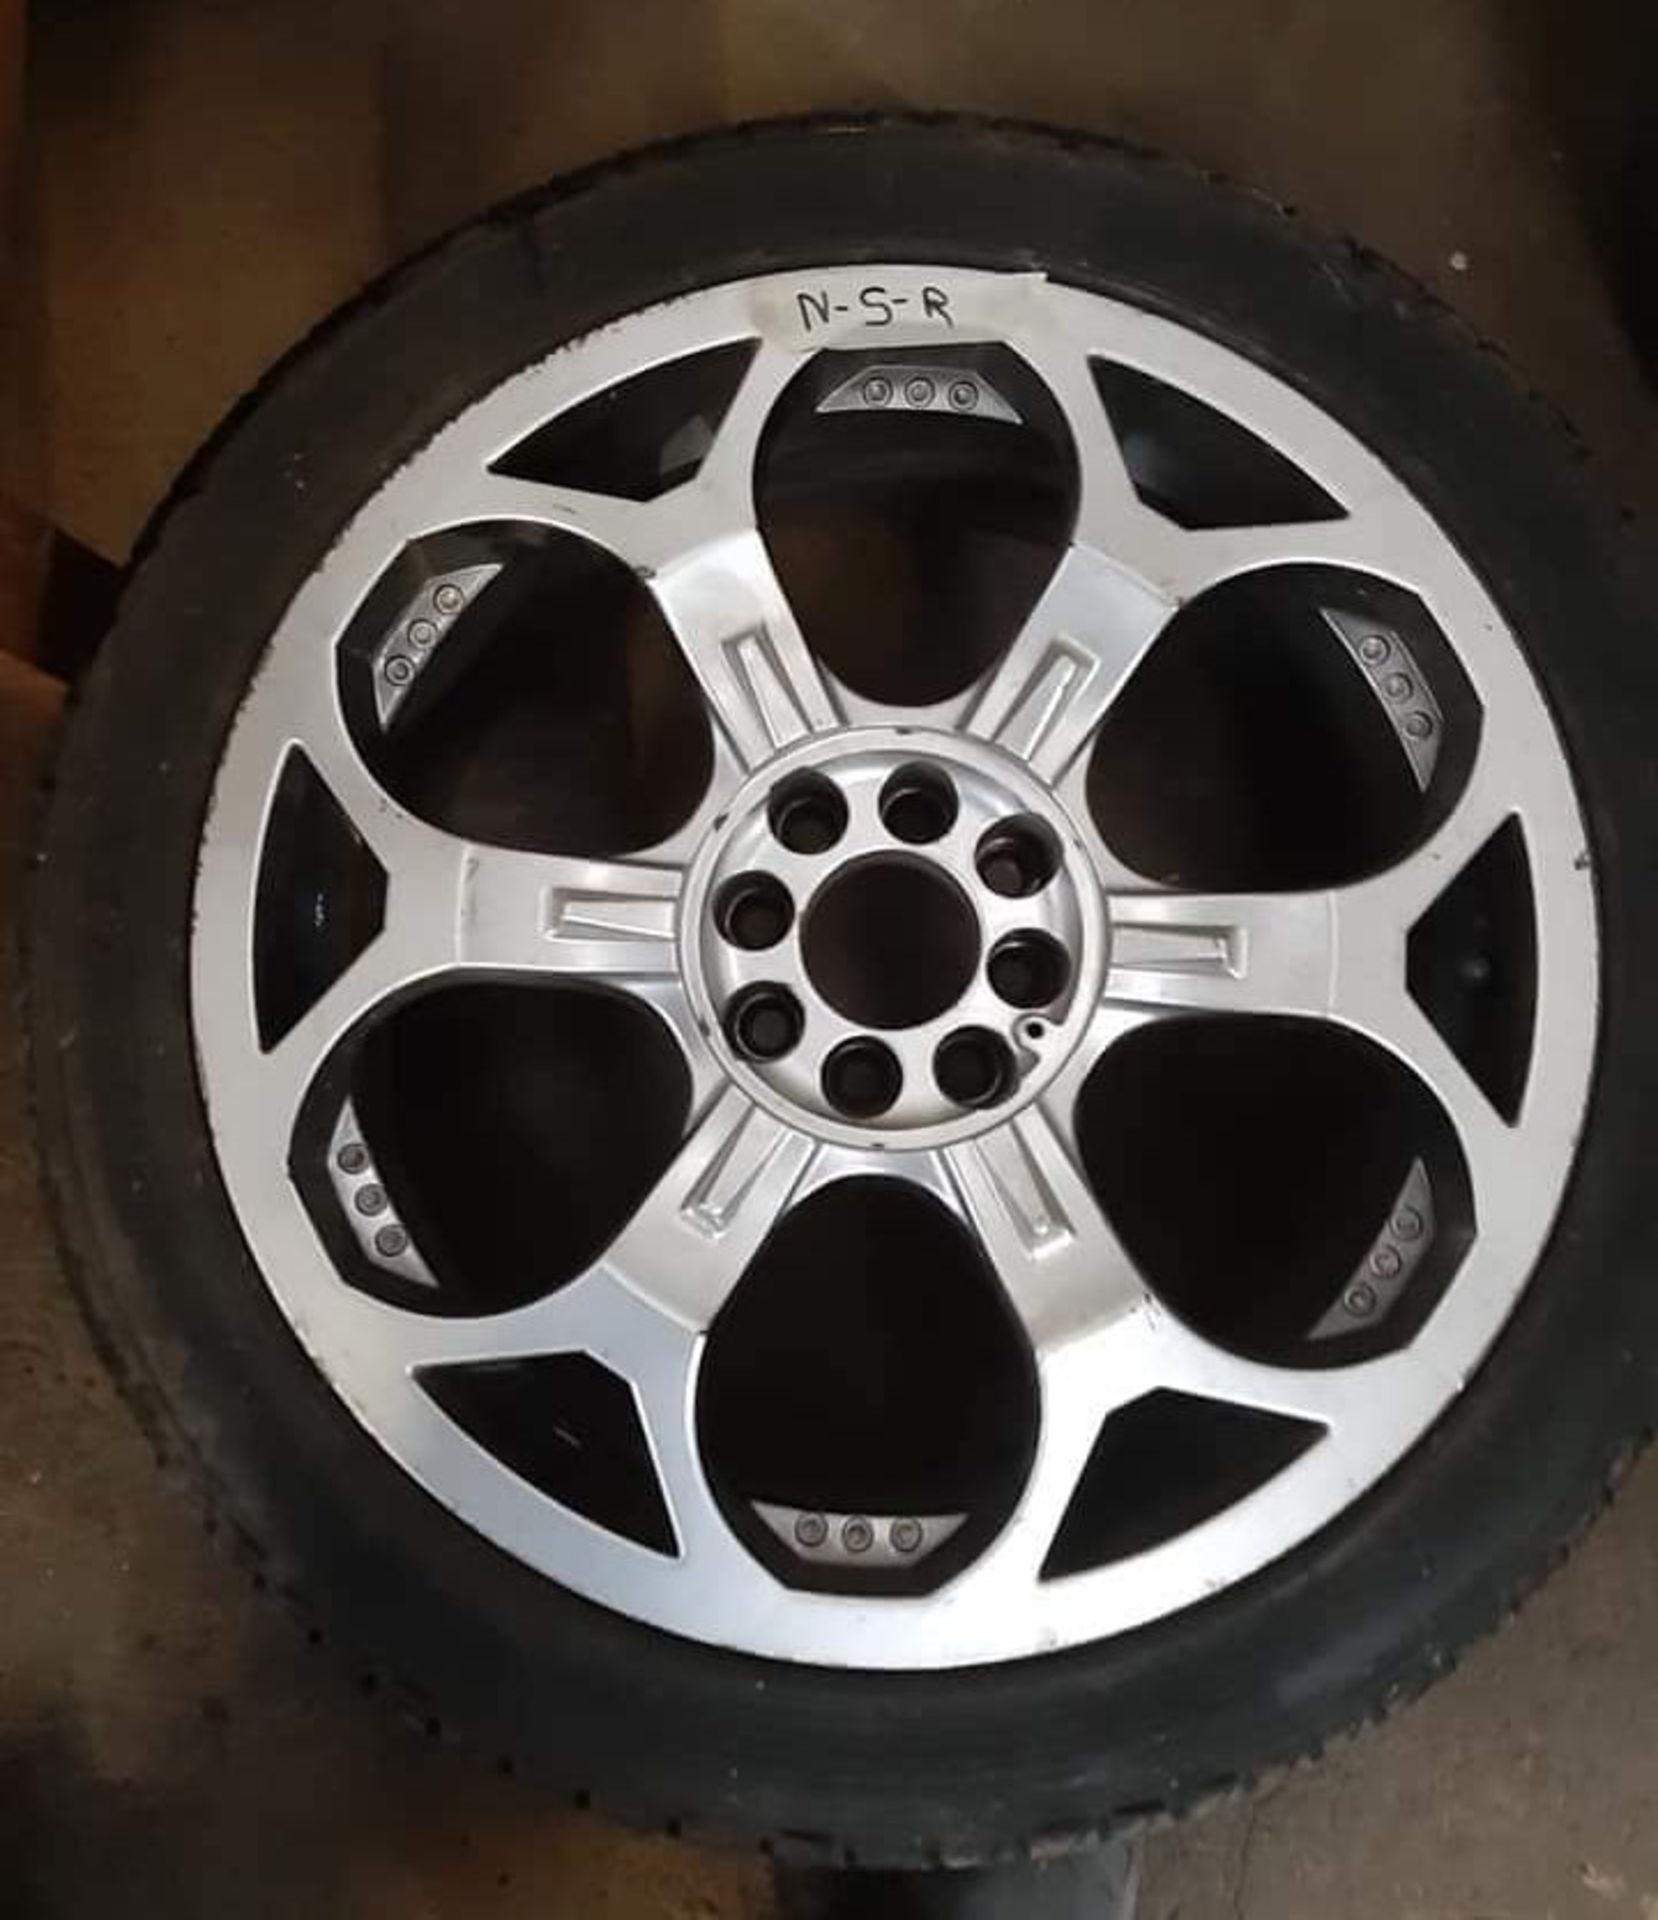 Set of 4 Multi Fitment 4 Stud 17" x 7.0" Alloy Wheels with 205/45ZR17 Tyres - CL444 - No VAT on - Image 5 of 9